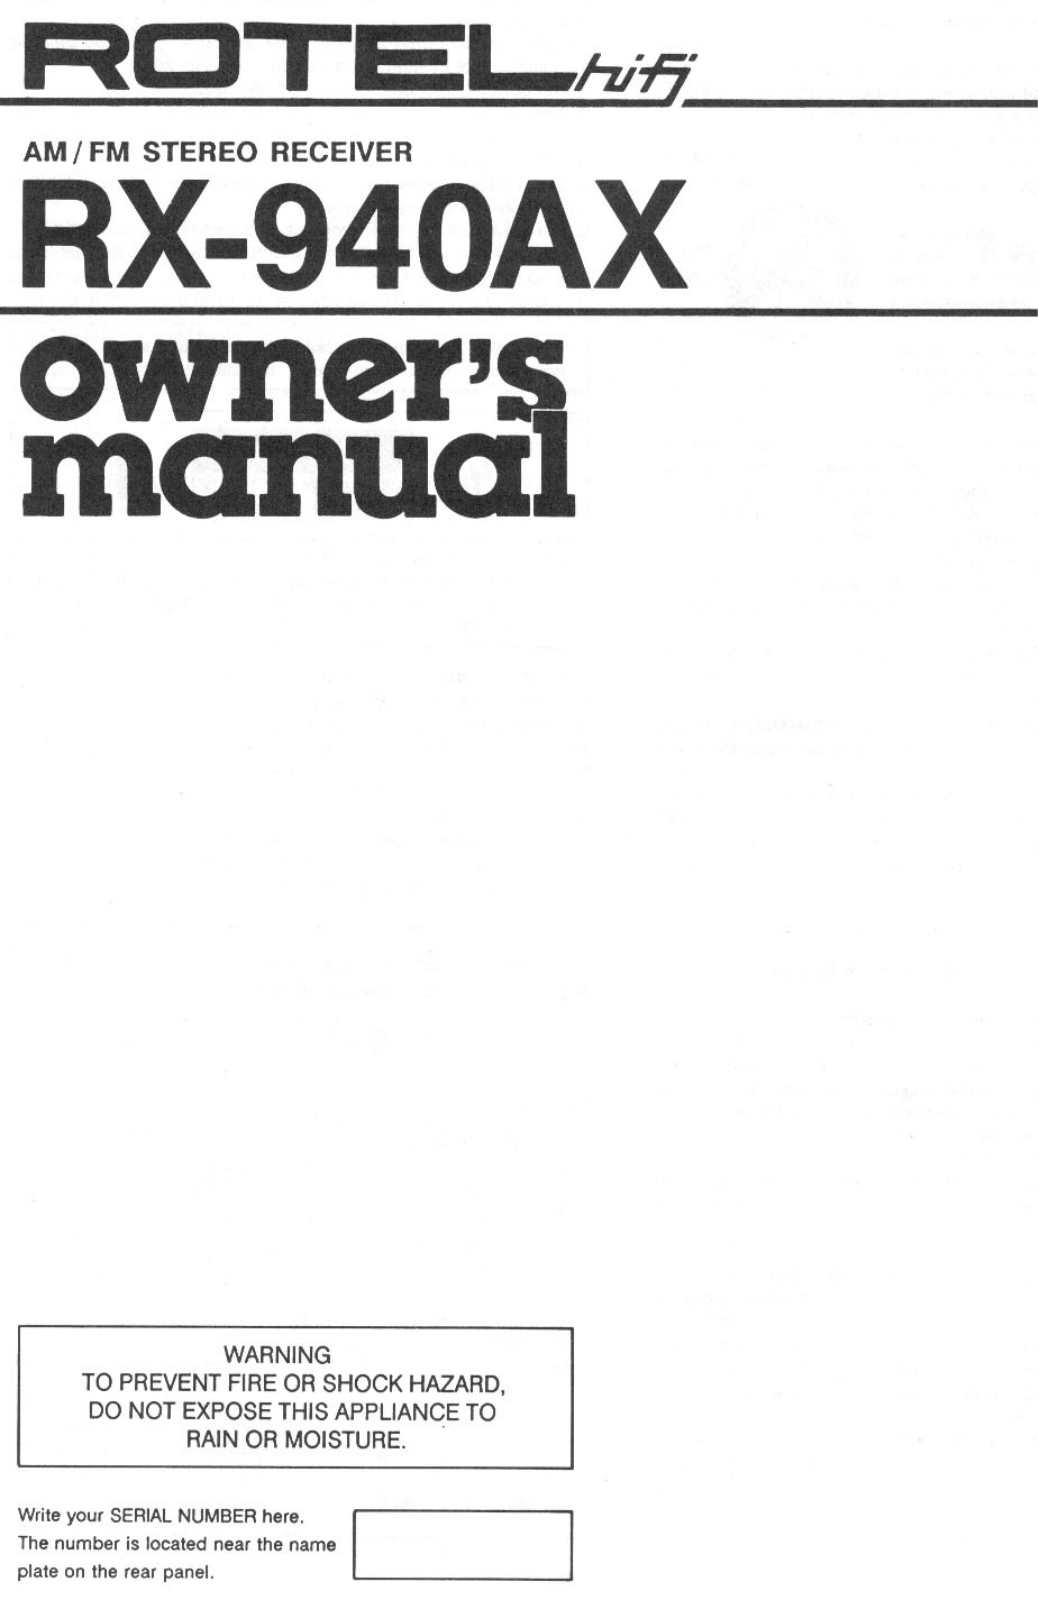 Rotel RX-940-AX Owners manual